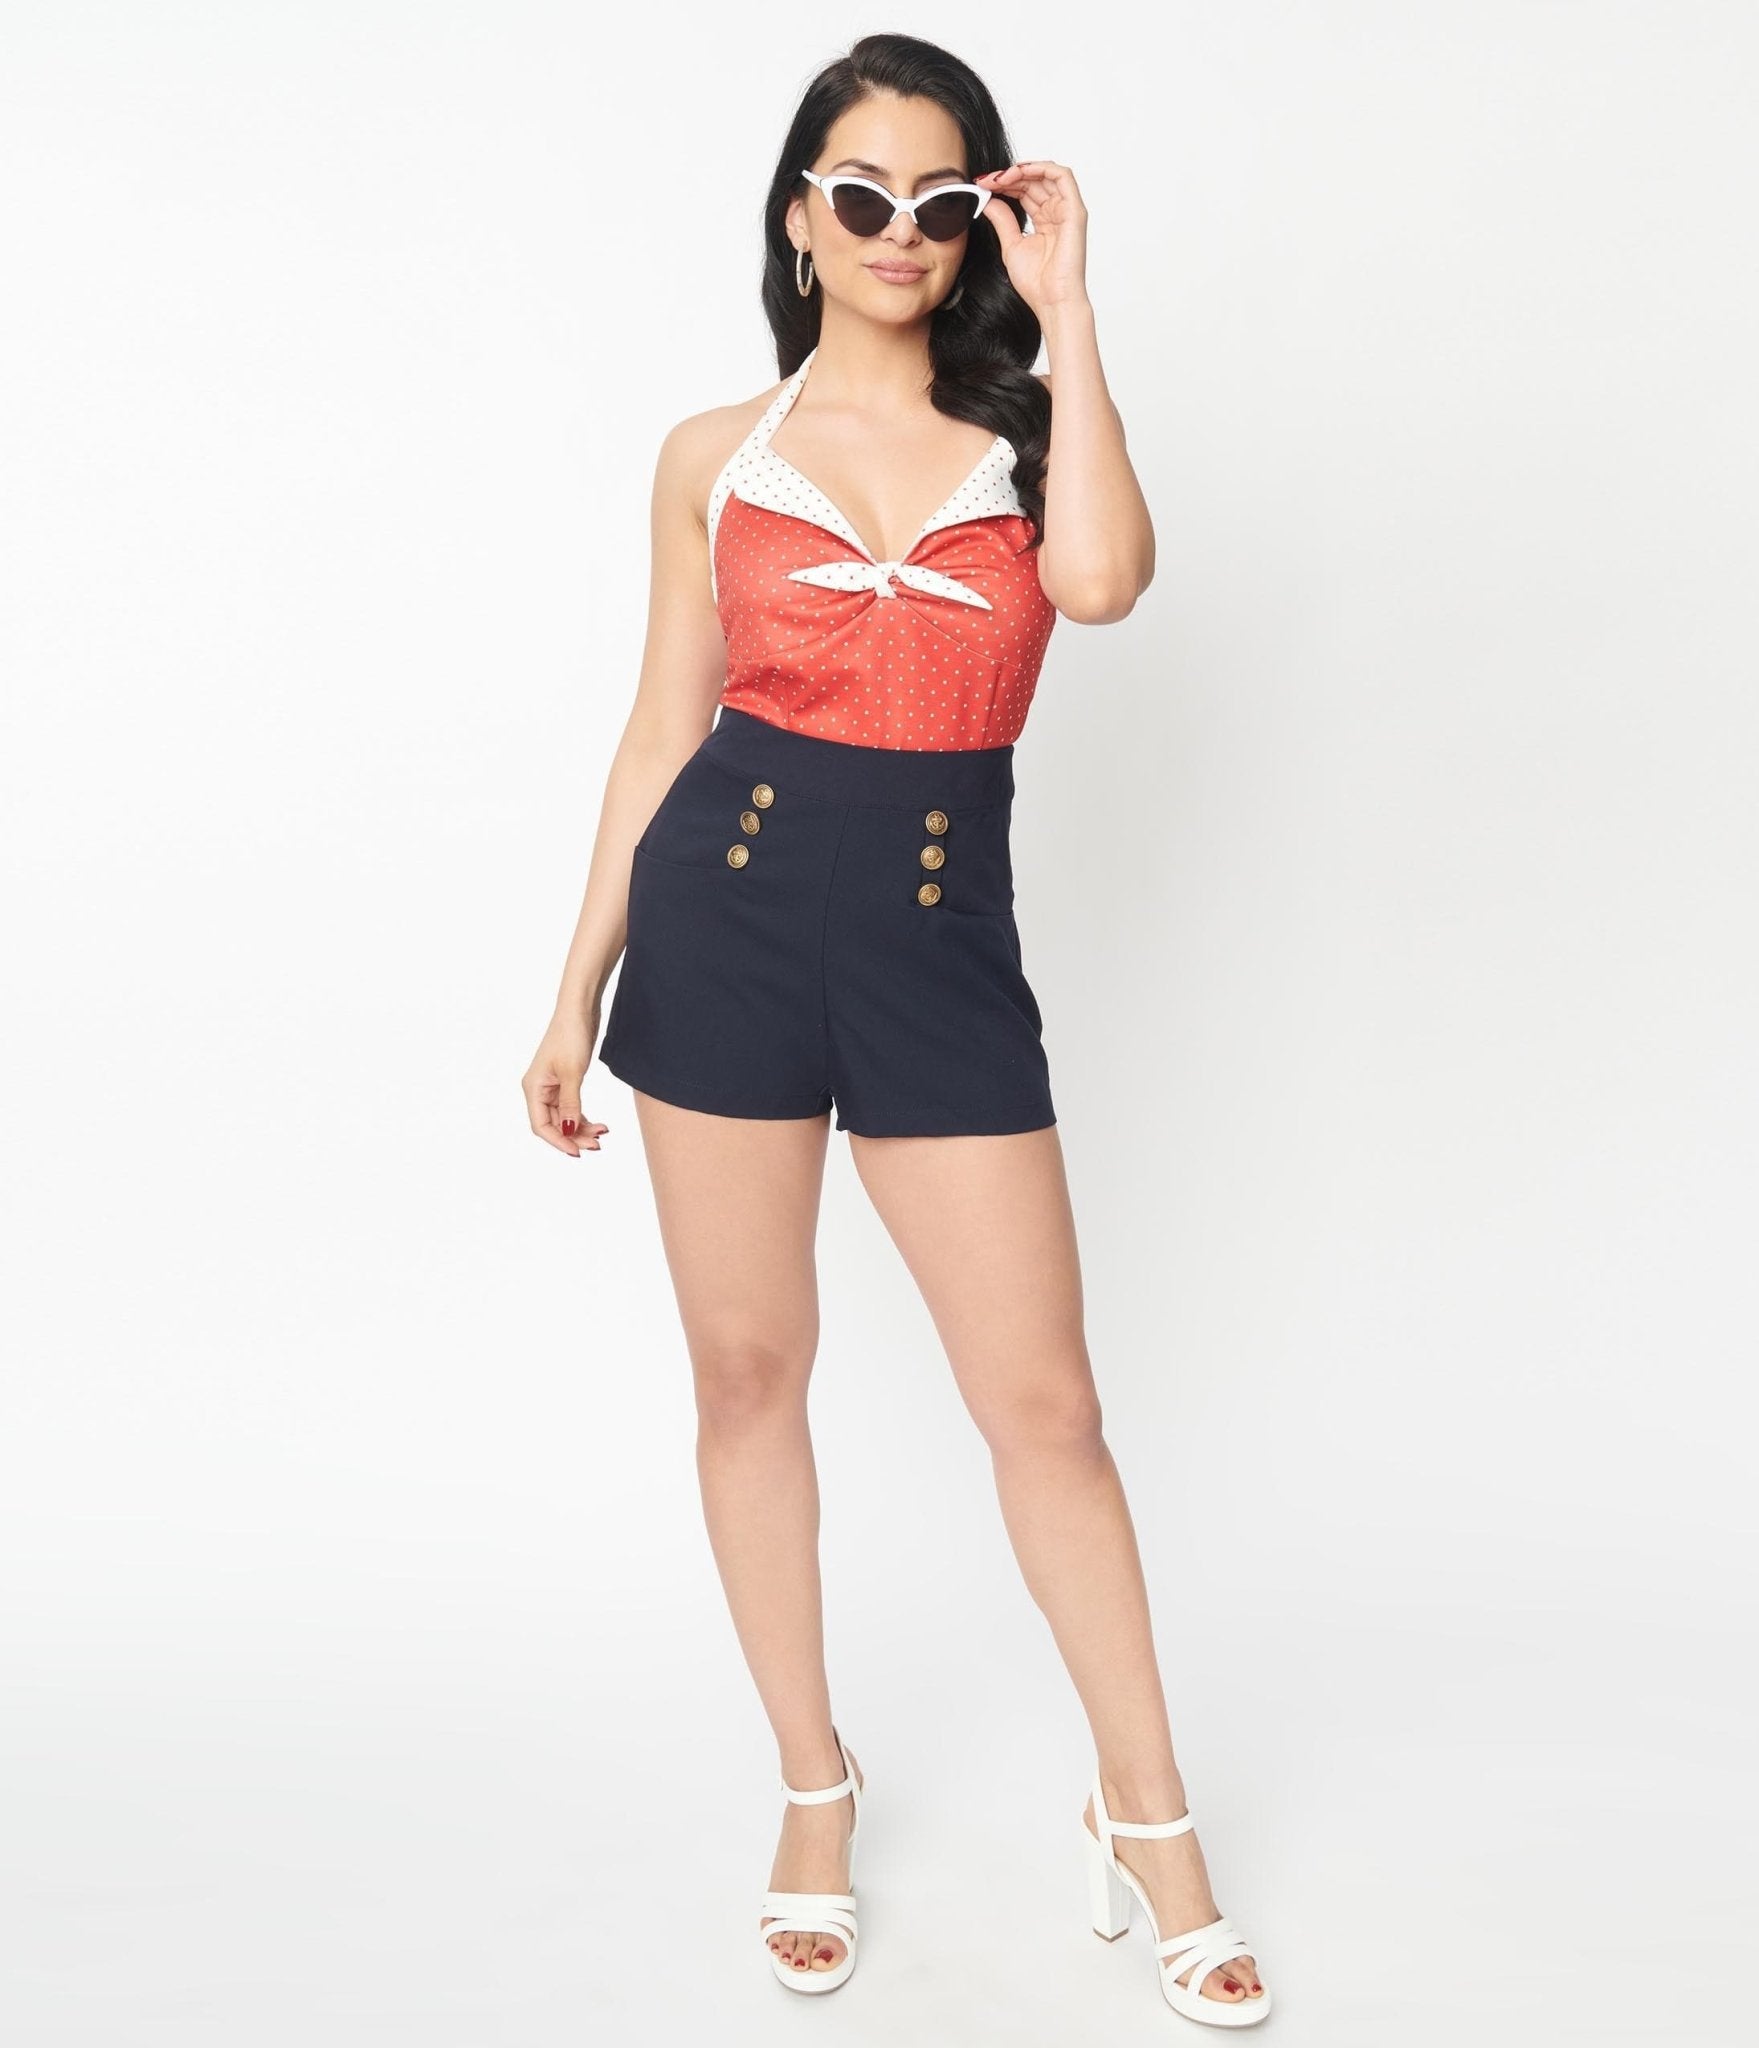 This High-Waisted Sailor-Shorts Outfit Has Quite the Online Following